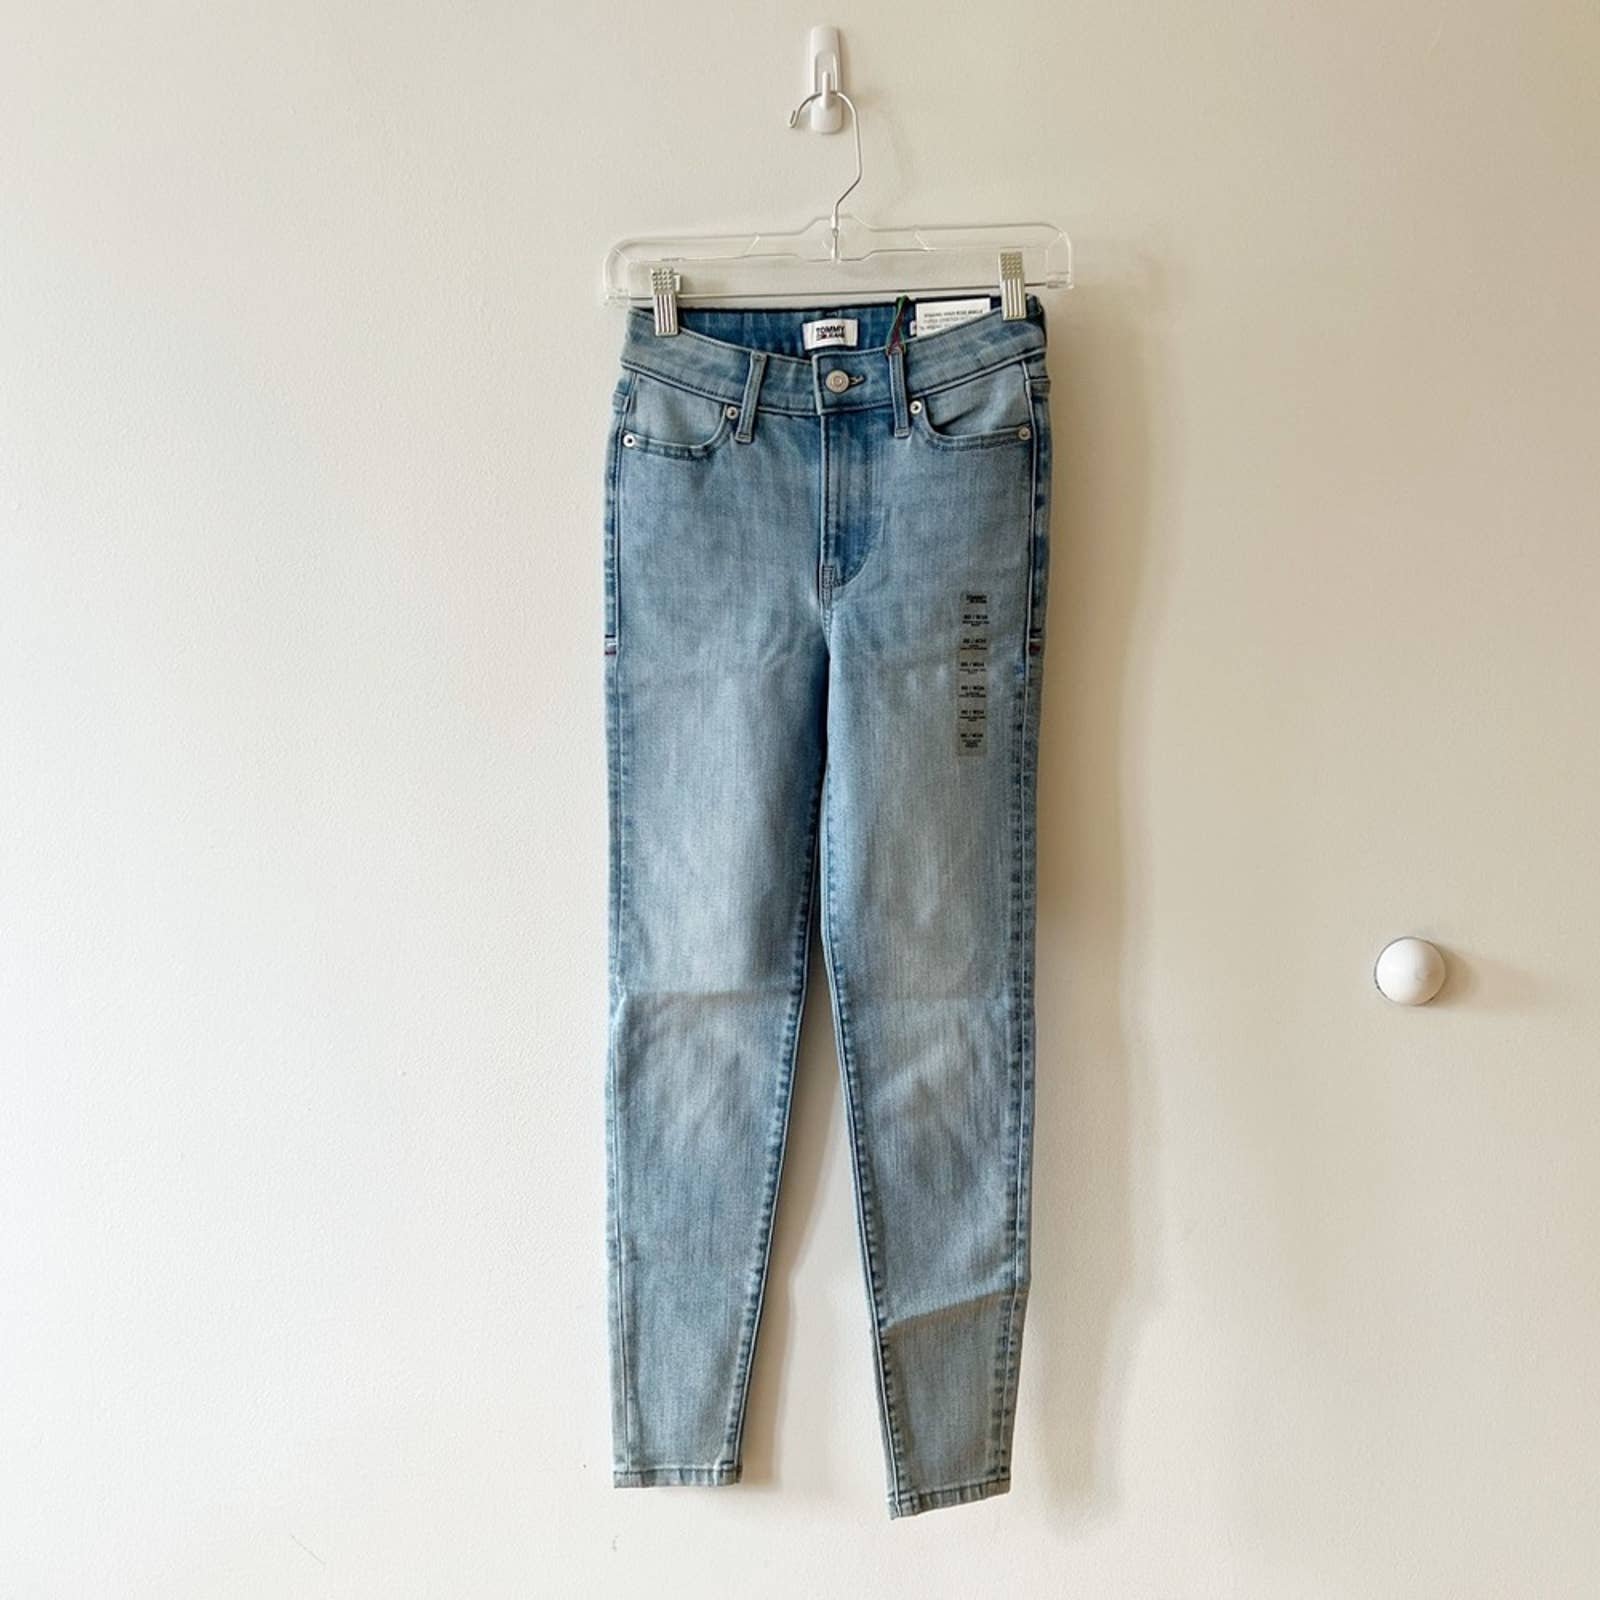 Discounted Tommy jeans skinny light wash jeans Ln6ilvcA